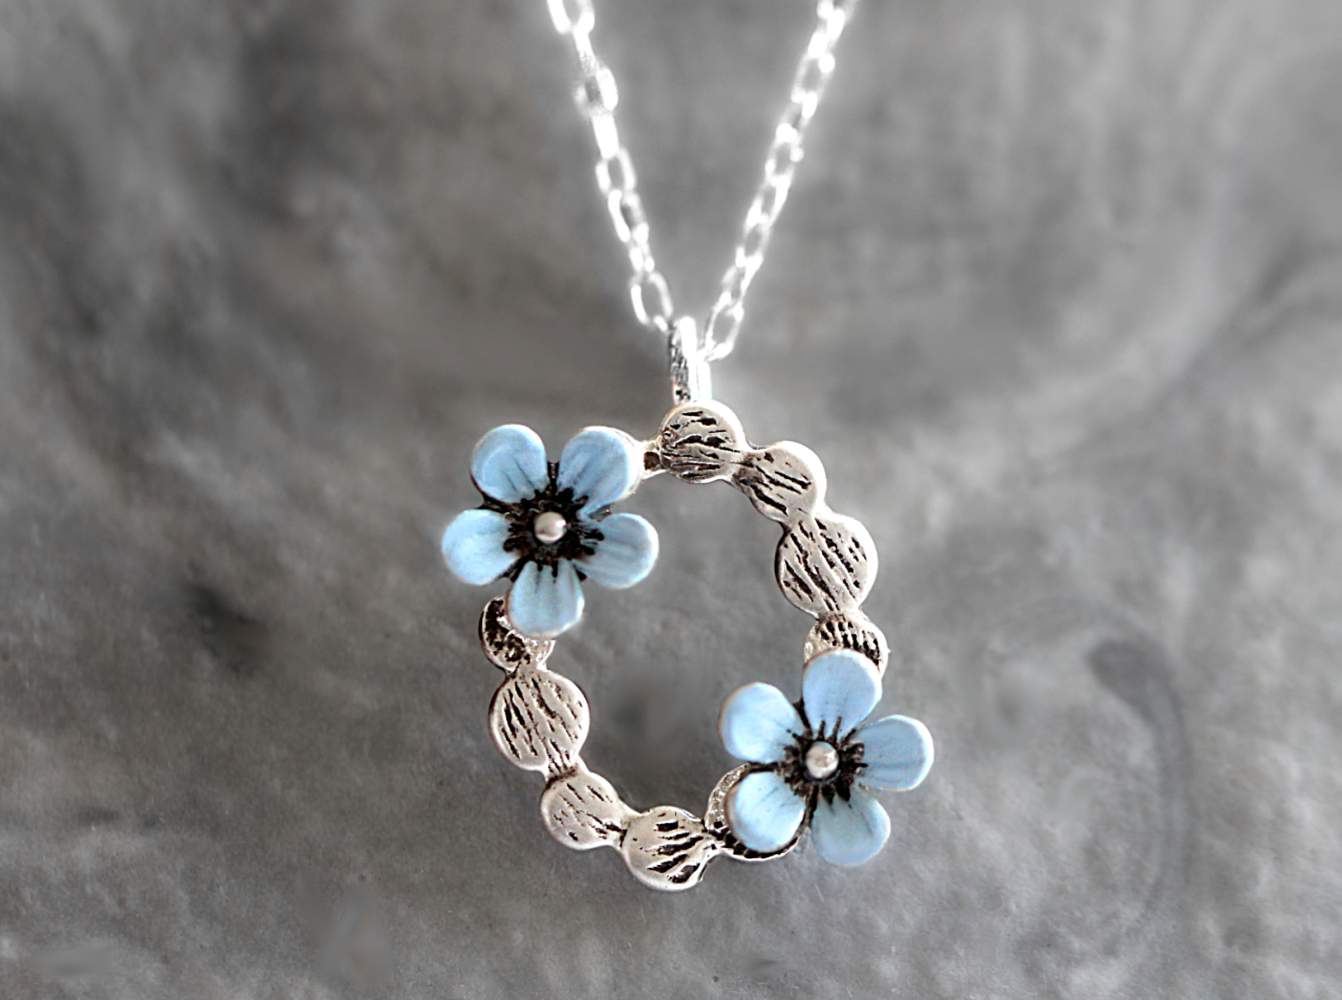 Small Forget me Not wreath necklace. Light blue enamel & 925 sterling silver